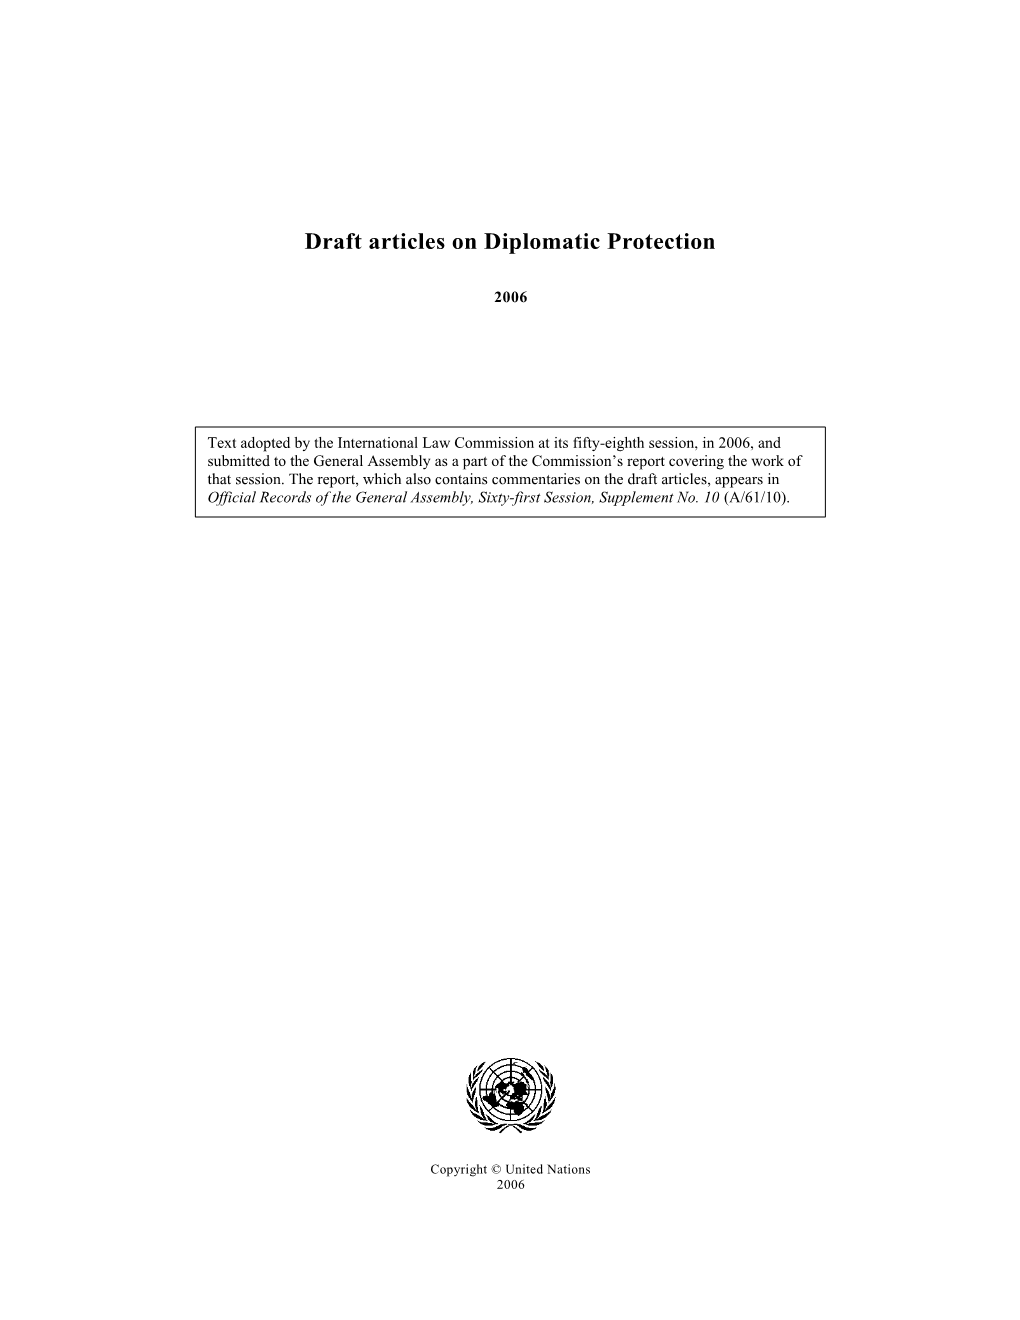 Draft Articles on Diplomatic Protection